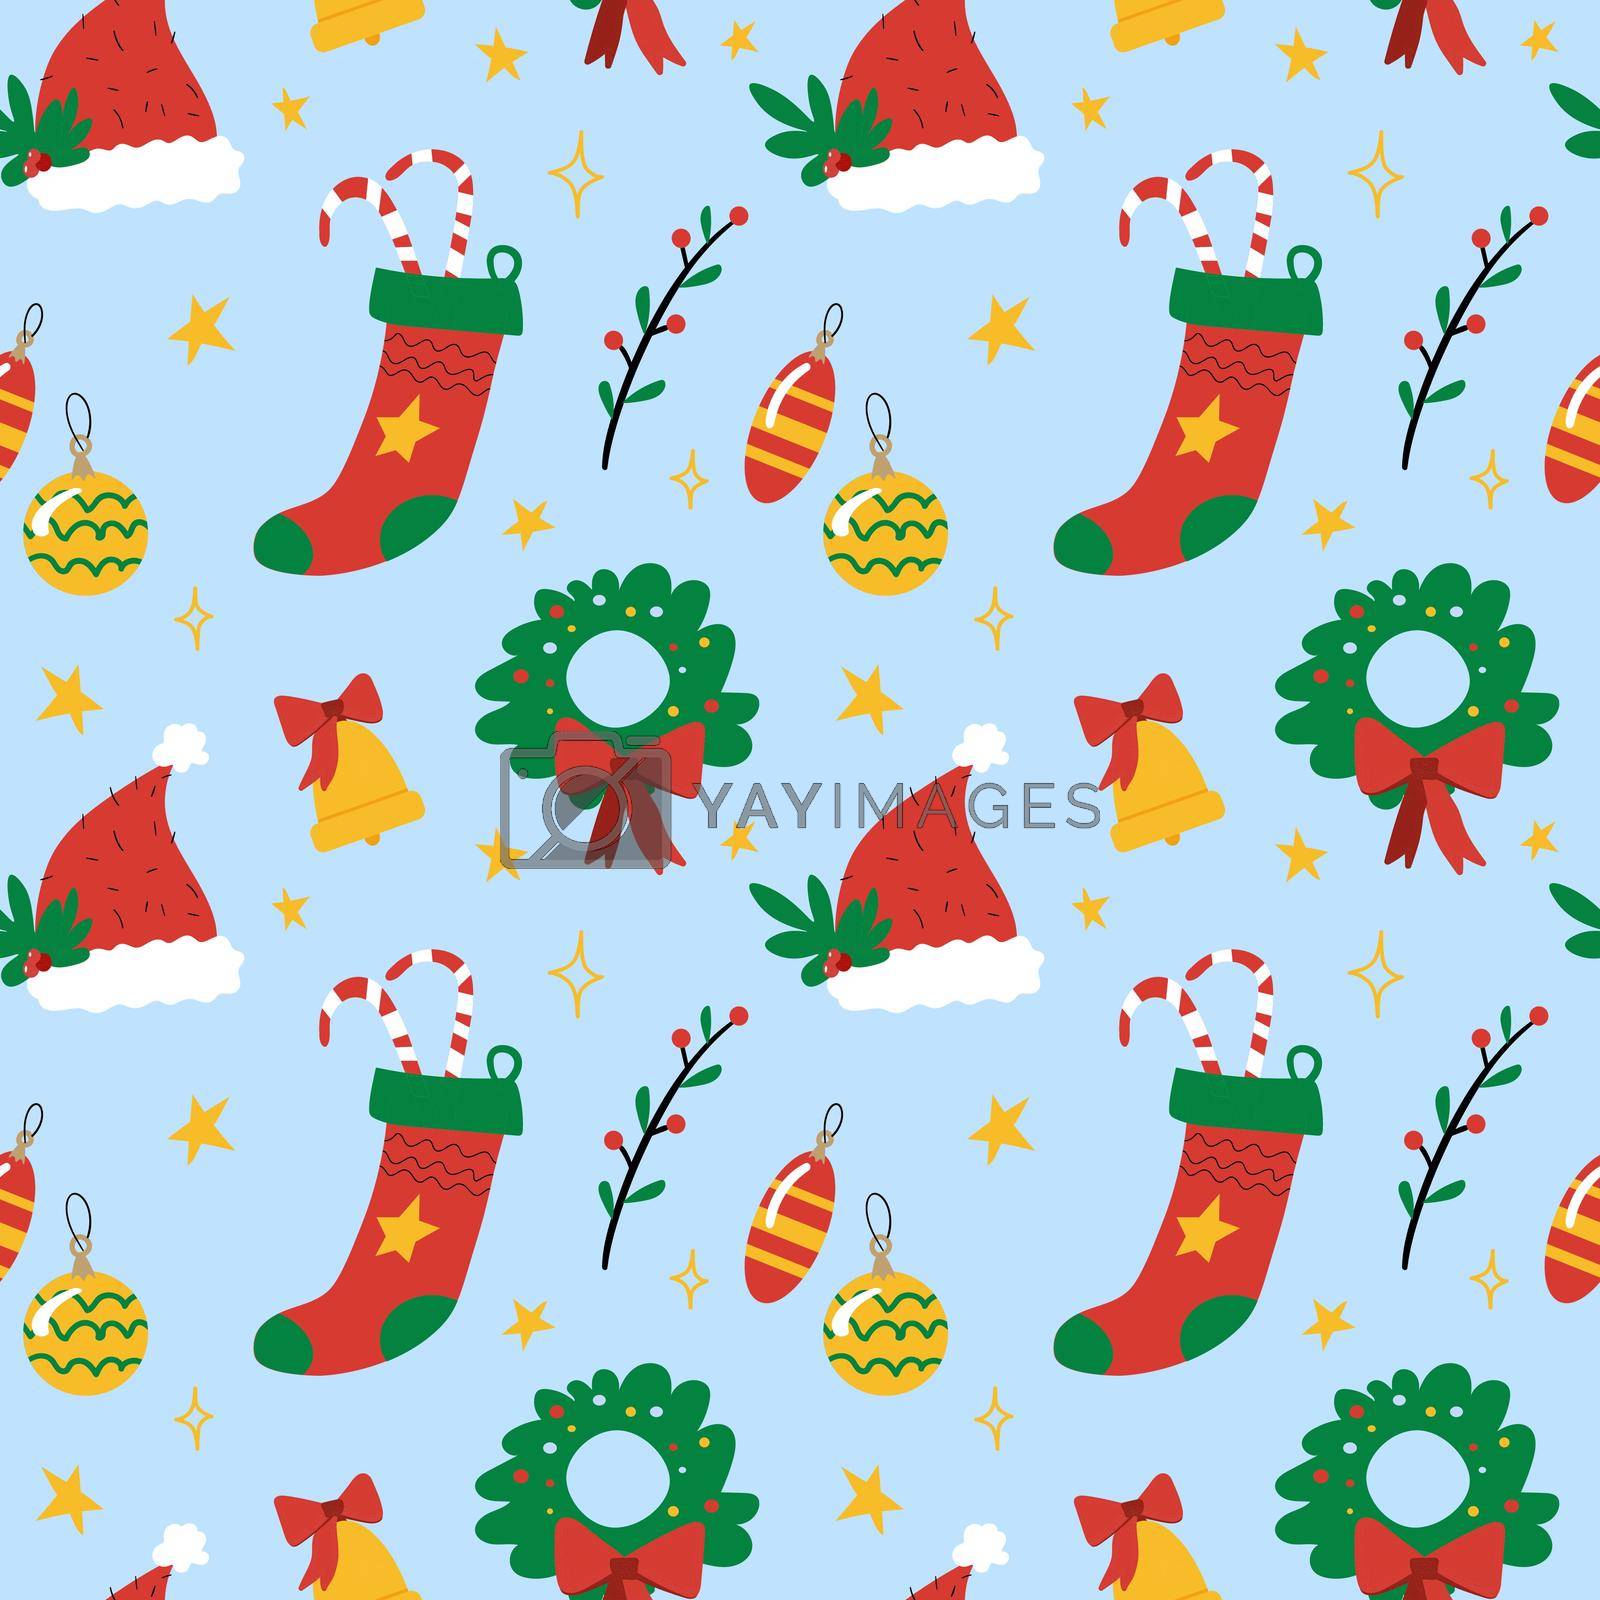 Merry Christmas and Happy New Year 2017. Christmas season hand drawn seamless pattern. Vector illustration. Doodle style. Decorations. Winter holiday backgrounds for design. Deer, snowflakes